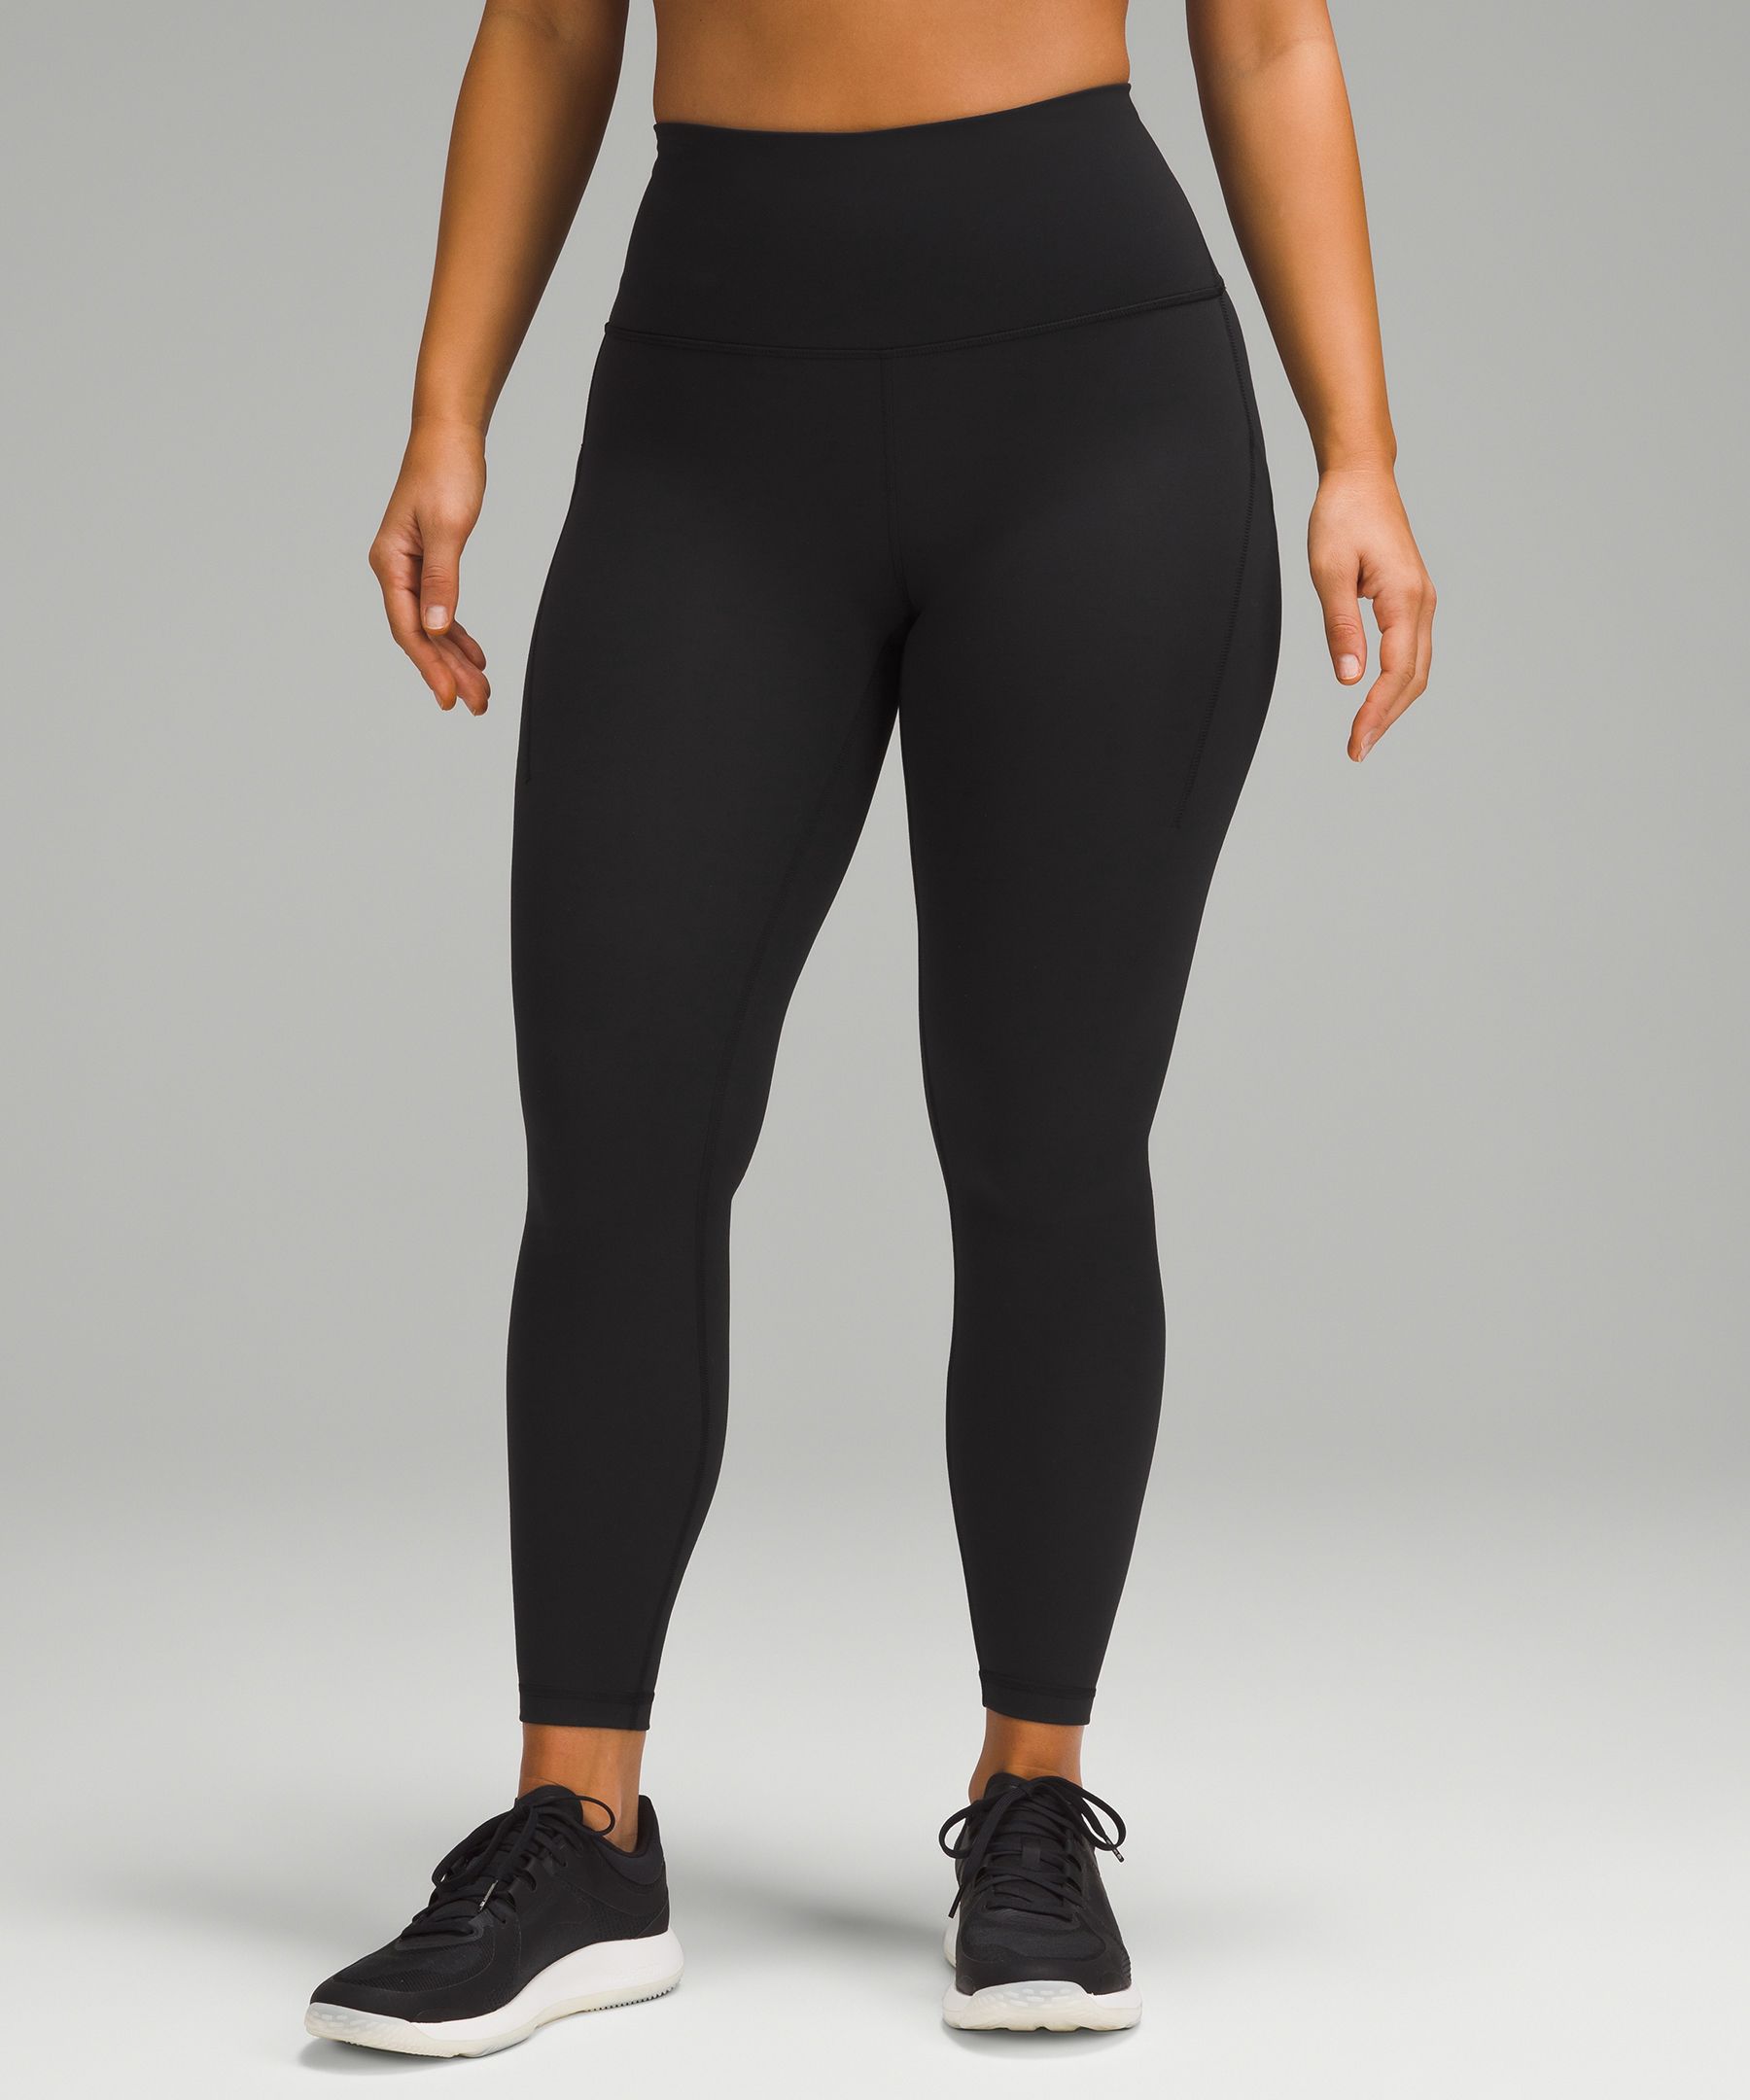 Wunder Train Contour Fit High-Rise Tight with Pockets 25" | Women's Leggings/Tights